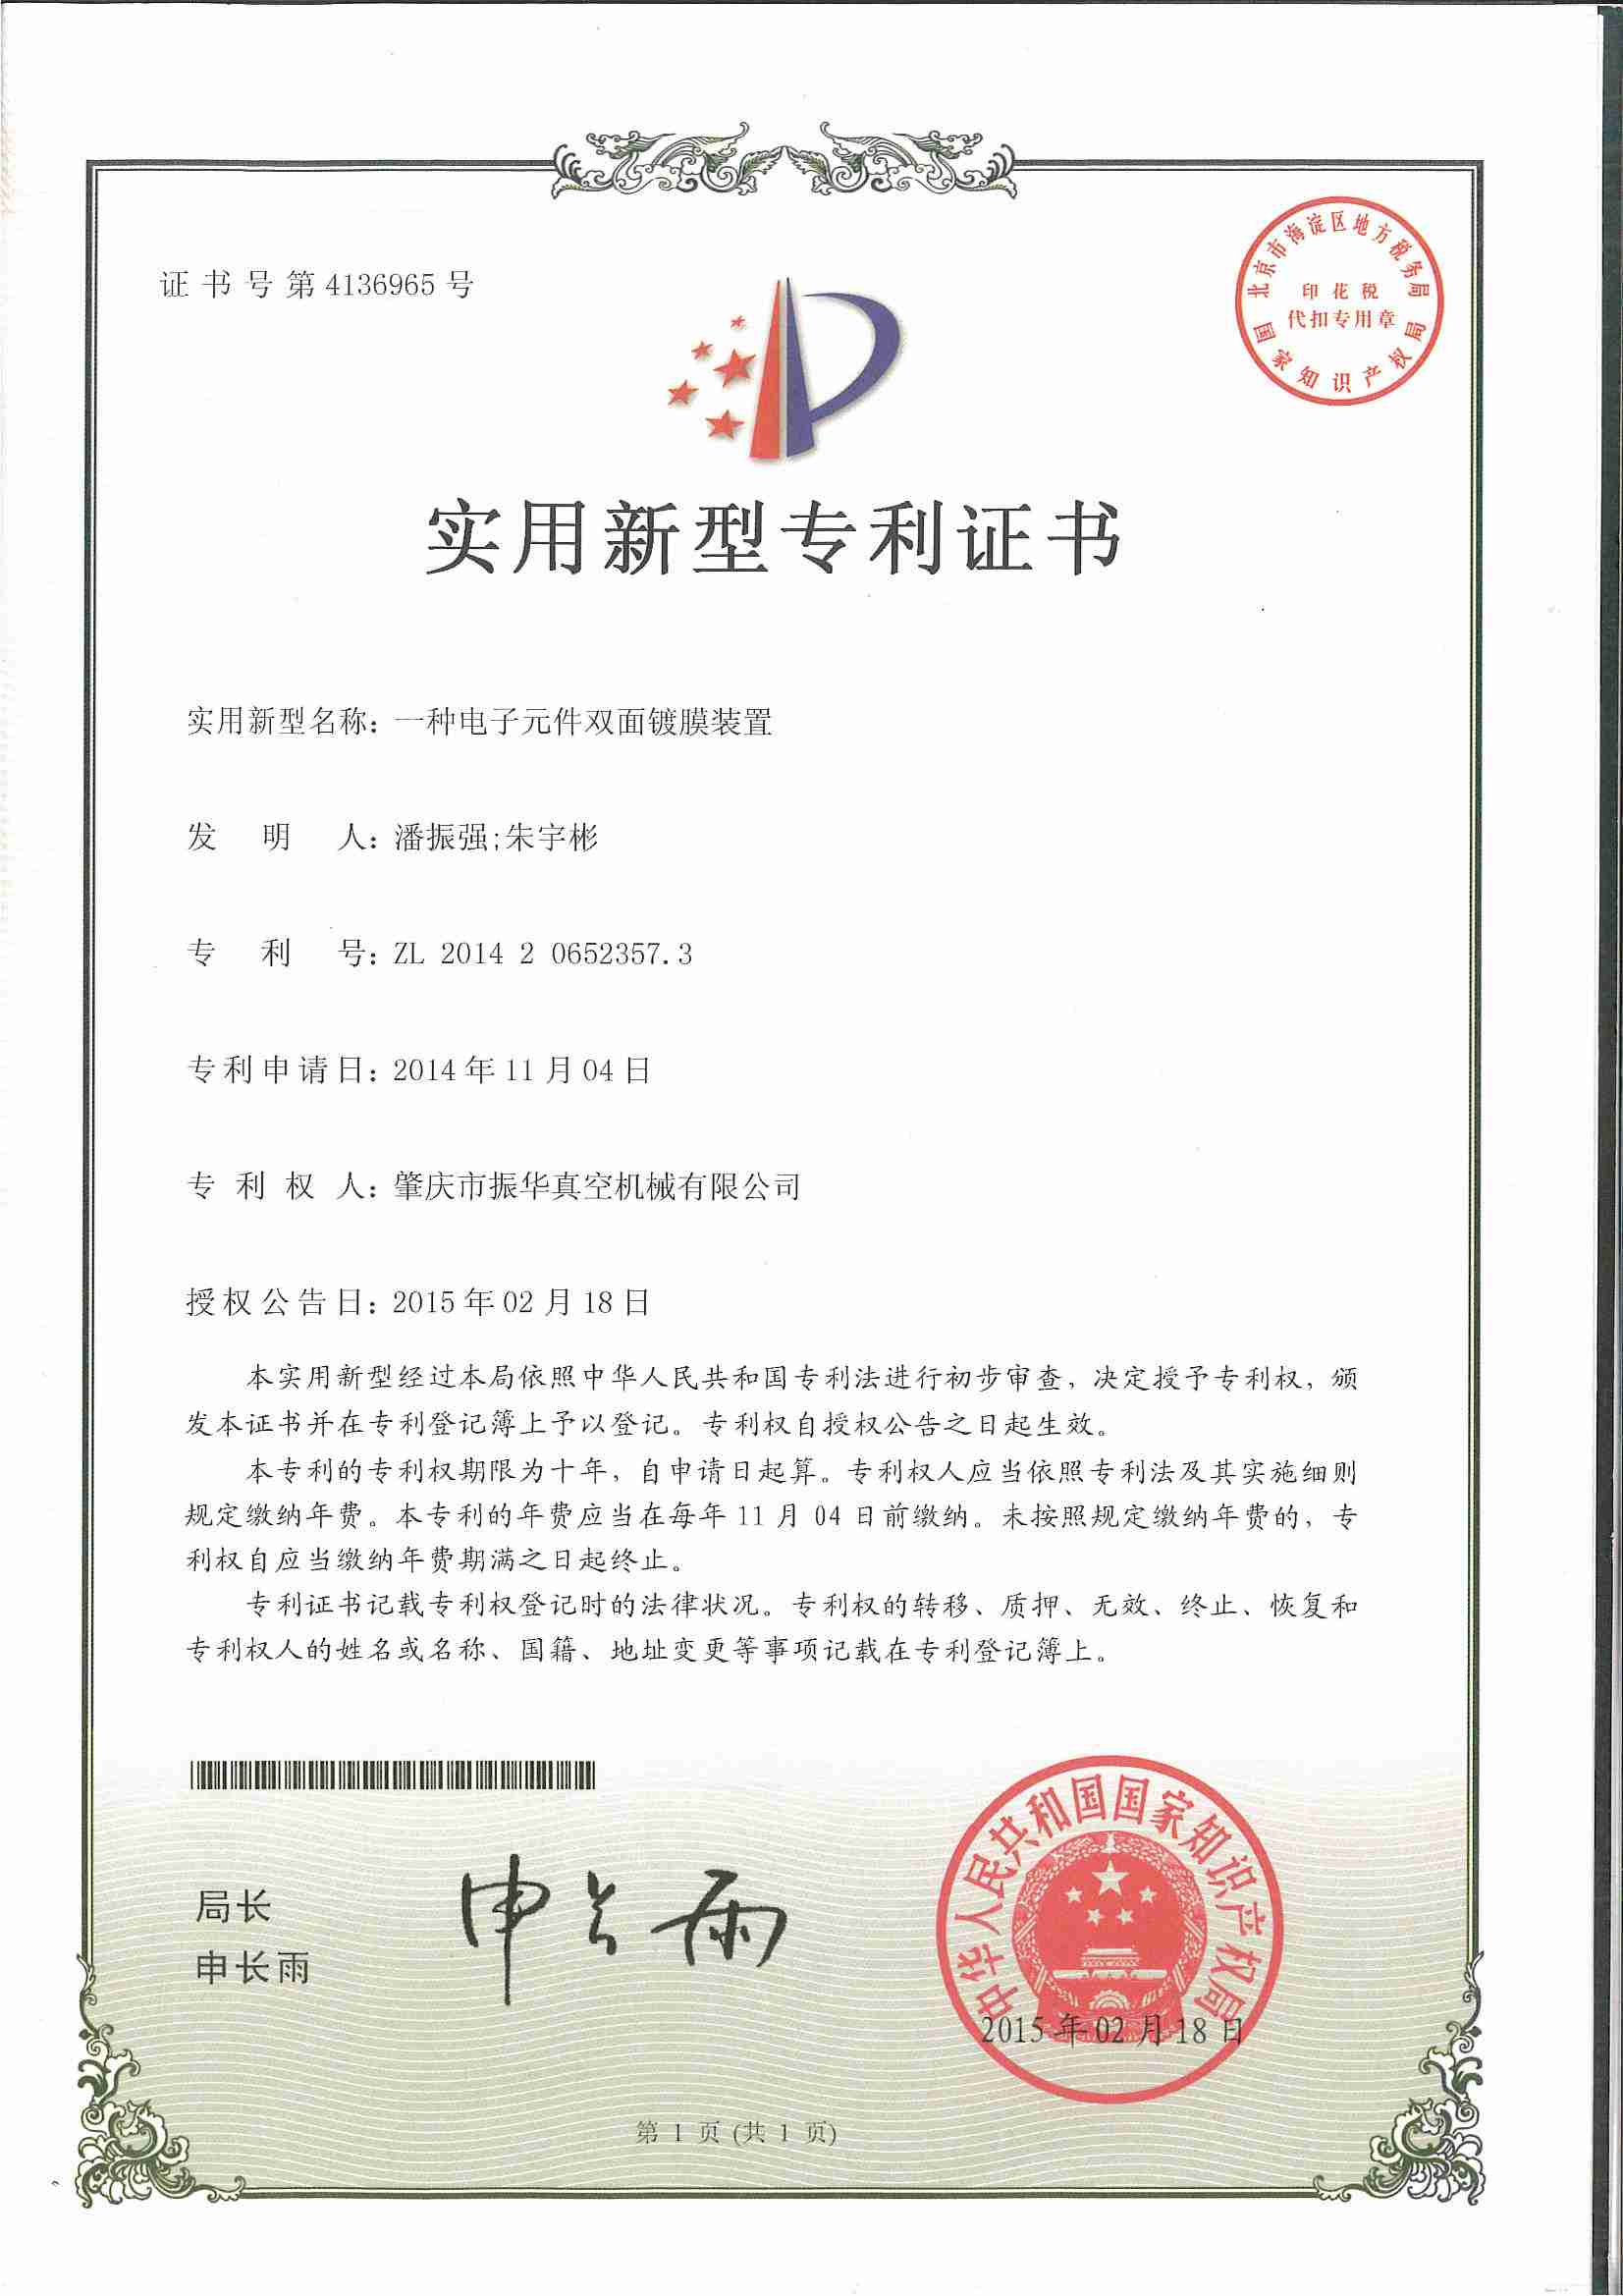 15.A kind of electronic component double-sided coating device certificate